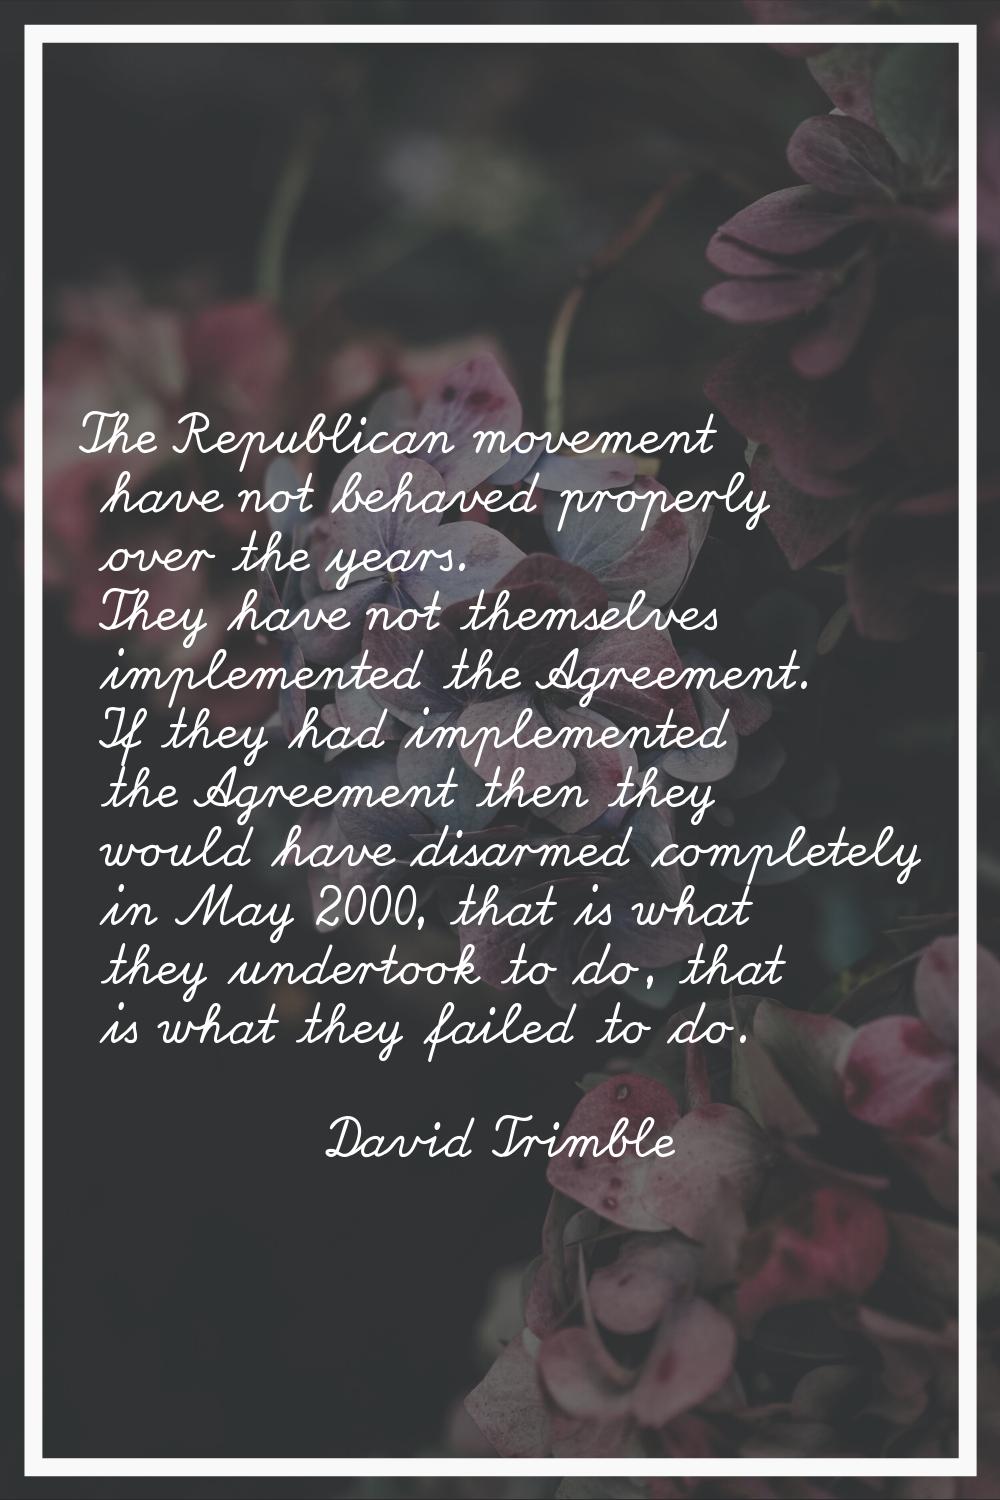 The Republican movement have not behaved properly over the years. They have not themselves implemen